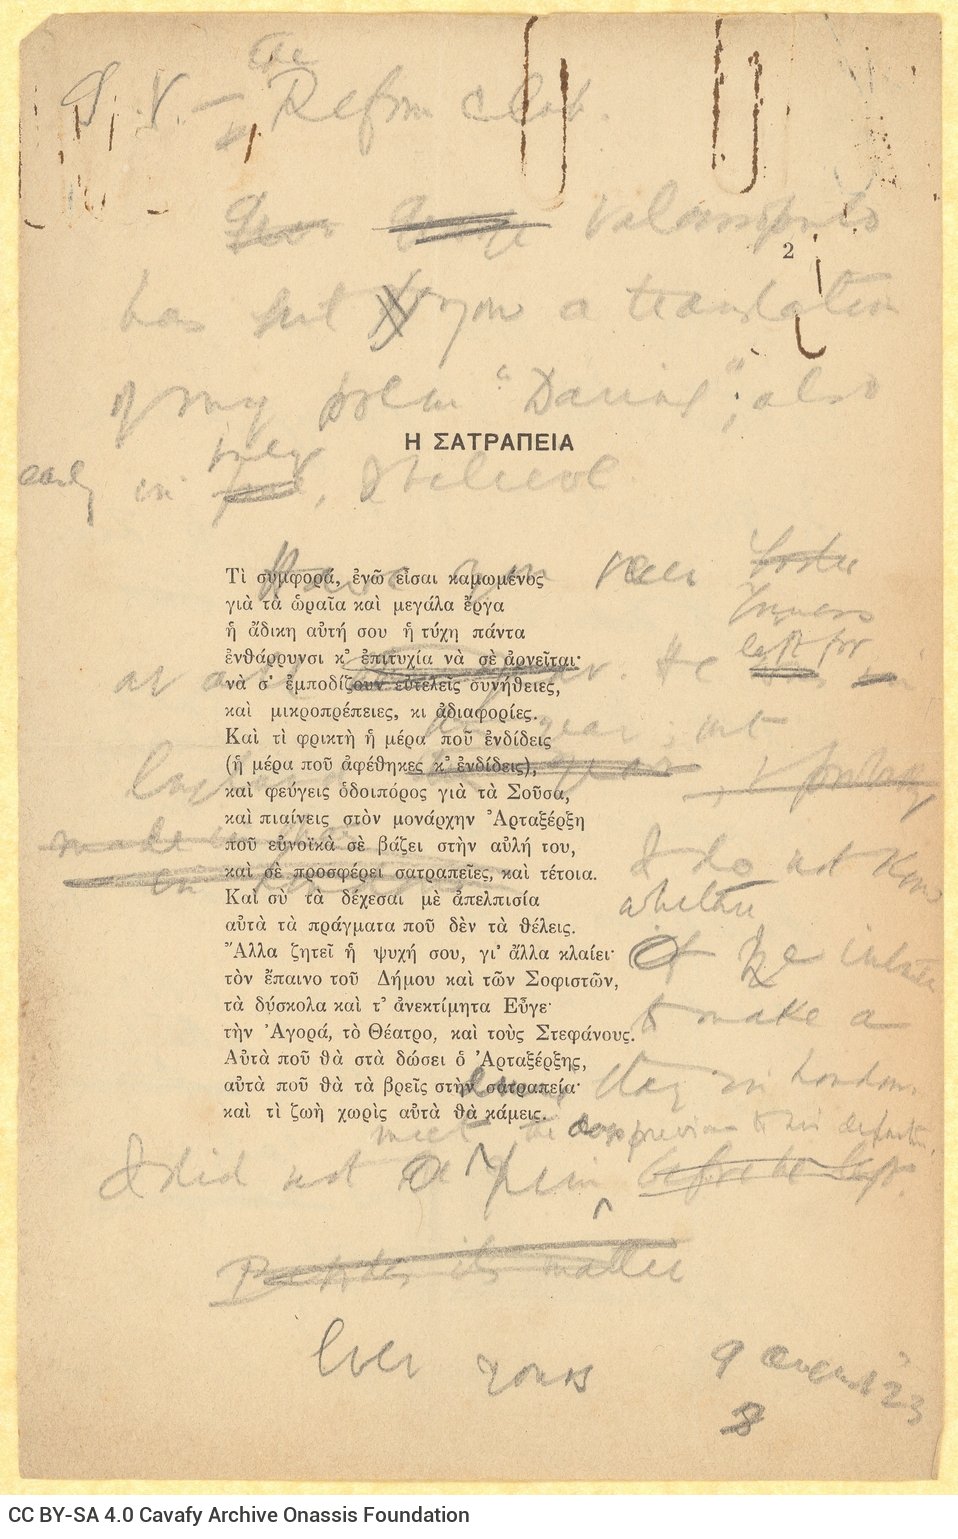 Handwritten draft letter by Cavafy to E. M. Forster on both sides of an undated printed broadsheet with the poem "The Satrapy